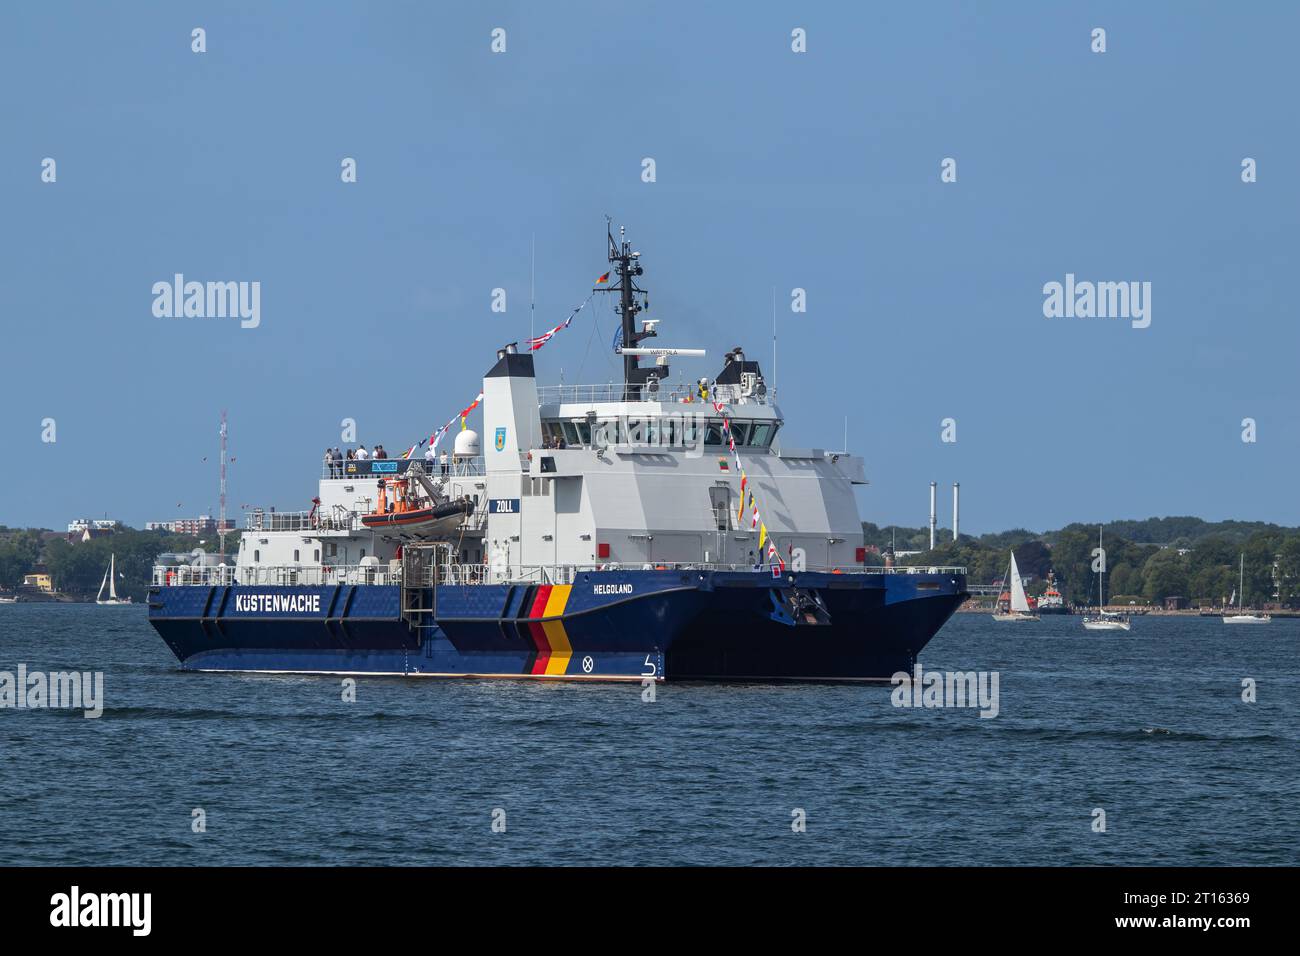 Kiel, Schleswig-Holstein, Germany. 24th June, 2023. The SWATH (small waterplane area twin hull) Helgoland (built in 2009), a patrol vessel of the Federal Customs Service of Germany and of the German Federal Coast Guard, takes part in the Tall Ships Parade (Windjammerparade) in Kieler Förde bay of Baltic Sea with about 60 tall ships, traditional sailing ships, steamboats and hundreds of sailing yachts as part of the Kiel Week 2023 (Kieler Woche), an annual sailing event in Kiel. Stock Photo